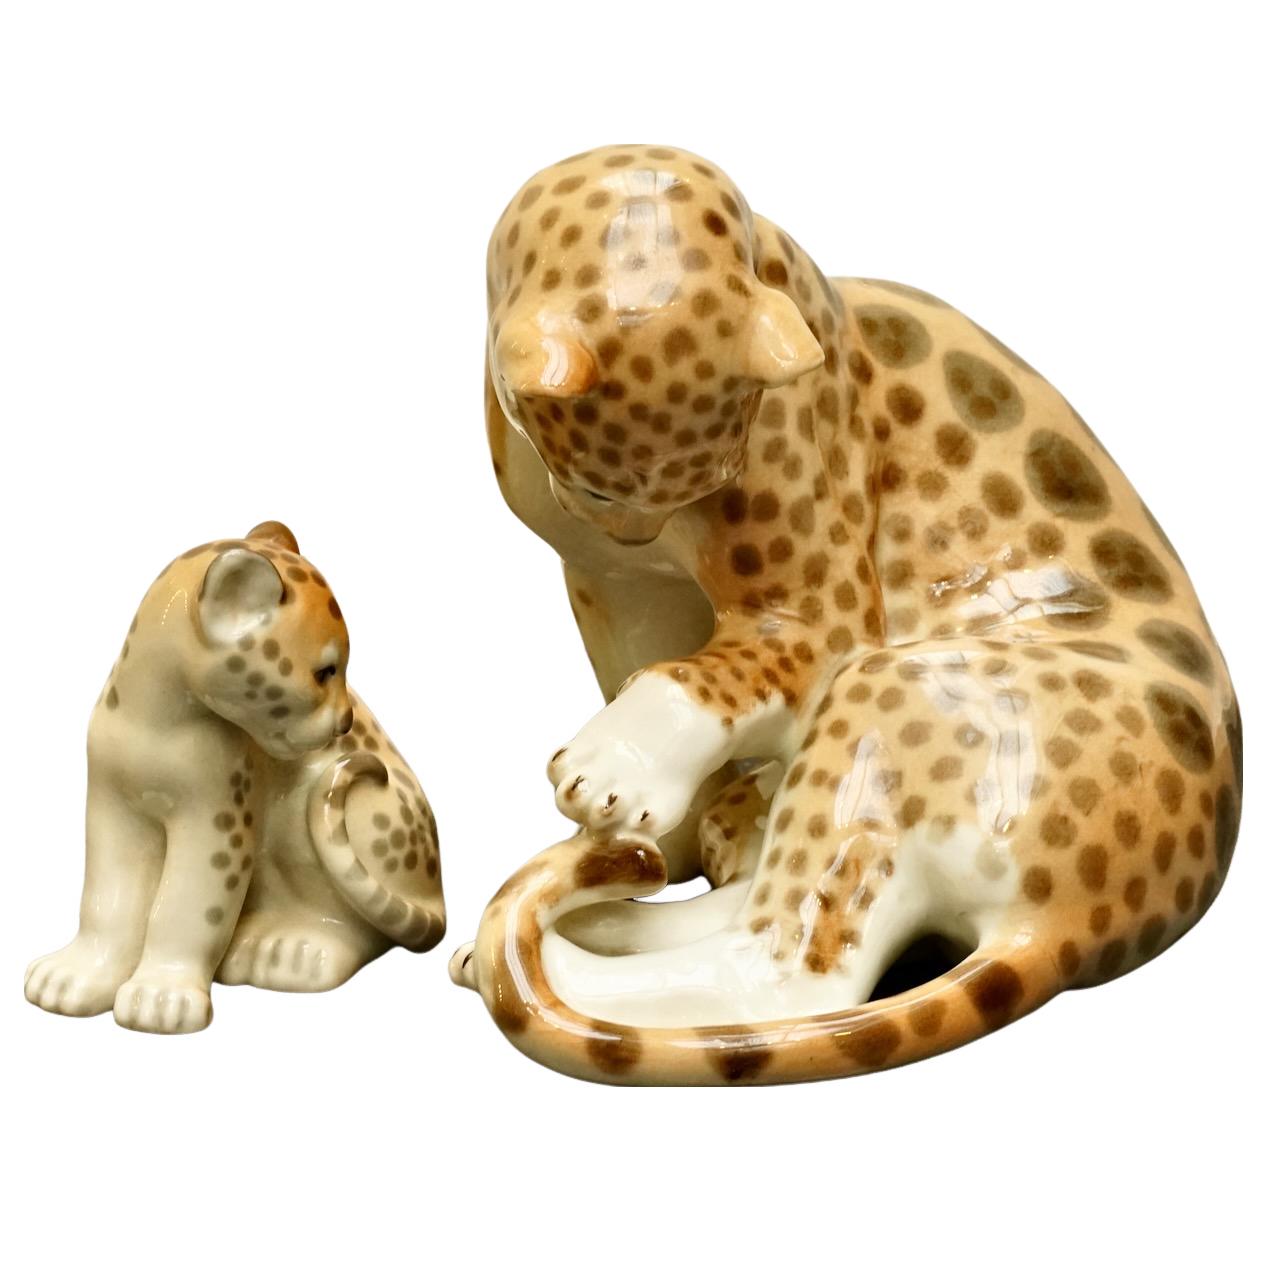 
Wonderful Lomonosov Porcelain large mother cheetah and cub figurines. Hand painted, made in Russia.

The mother cheetah measures length at base 18.5 cm / 7.28 by maximum width 14.5 cm / 5.7 inches, and height 17 cm / 6.7 inches. She is in very good